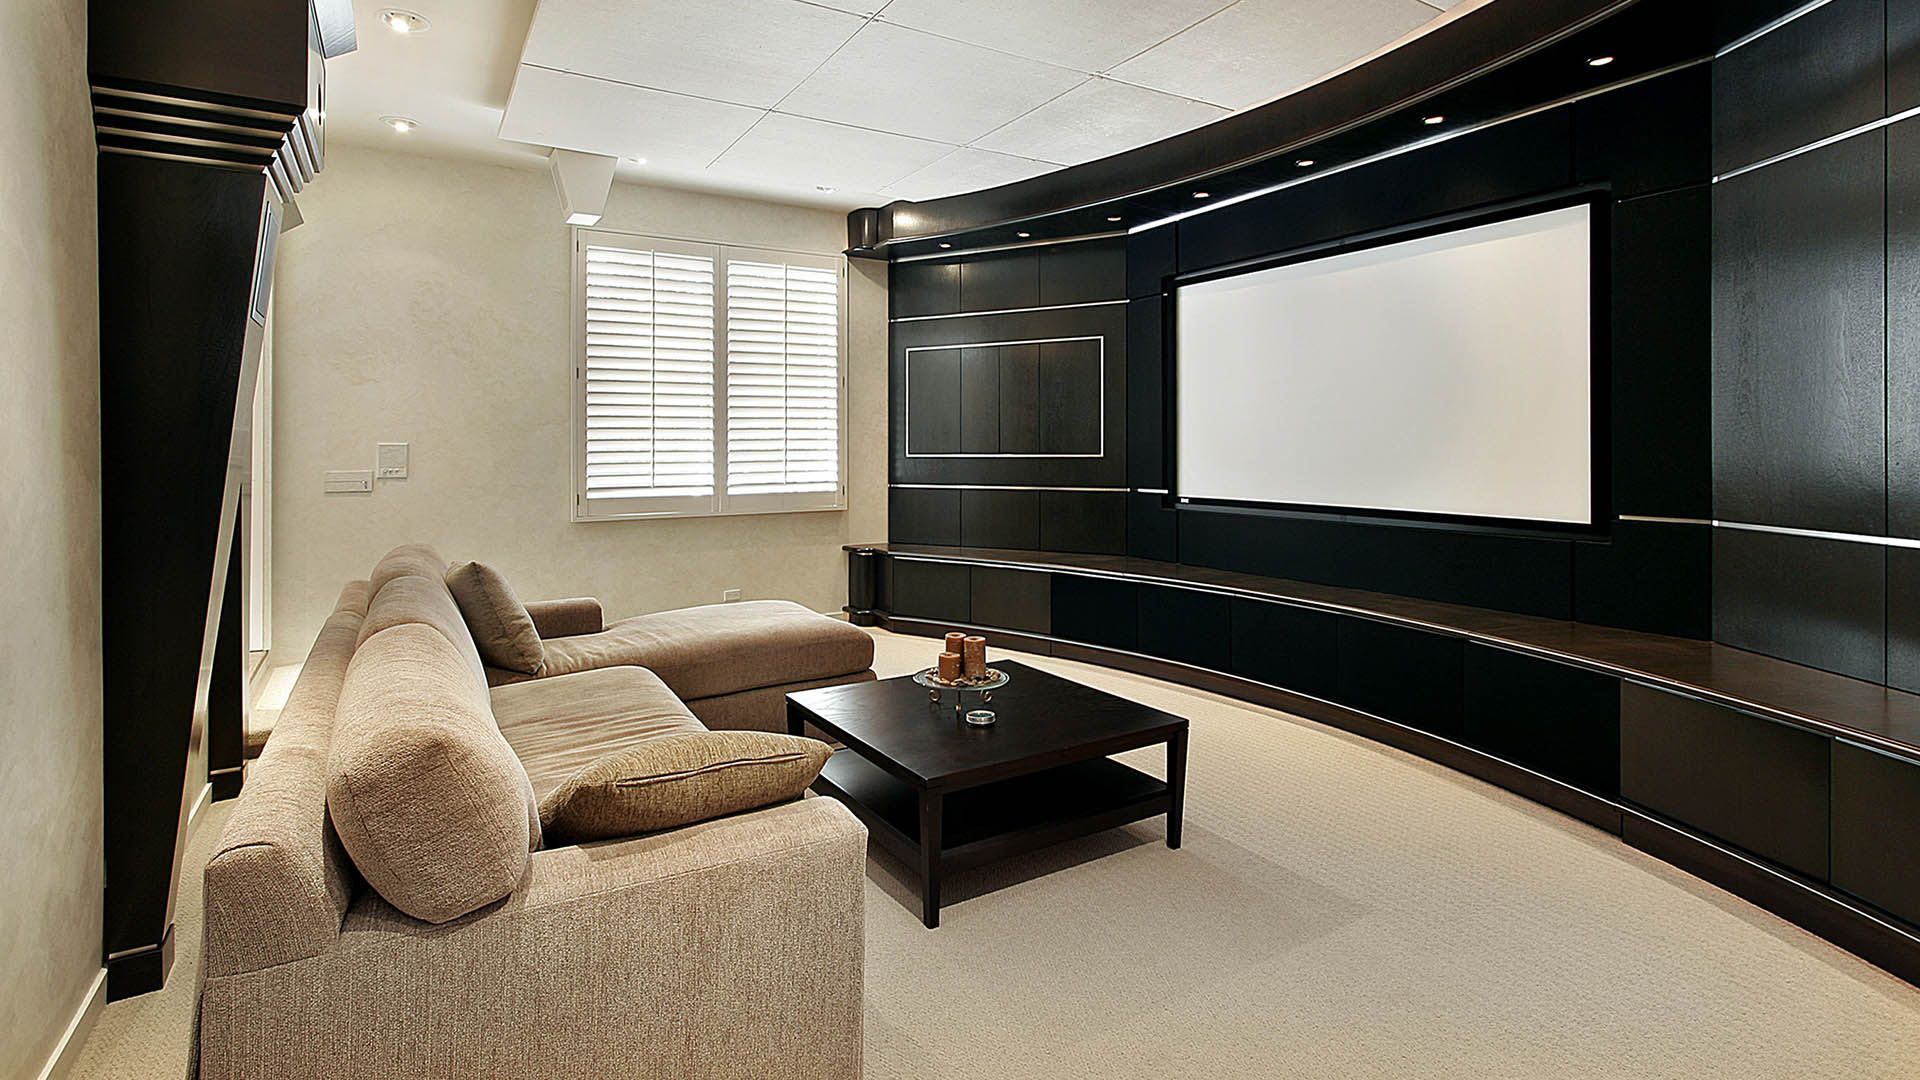 Home Theaters Installation in Rockville, MD